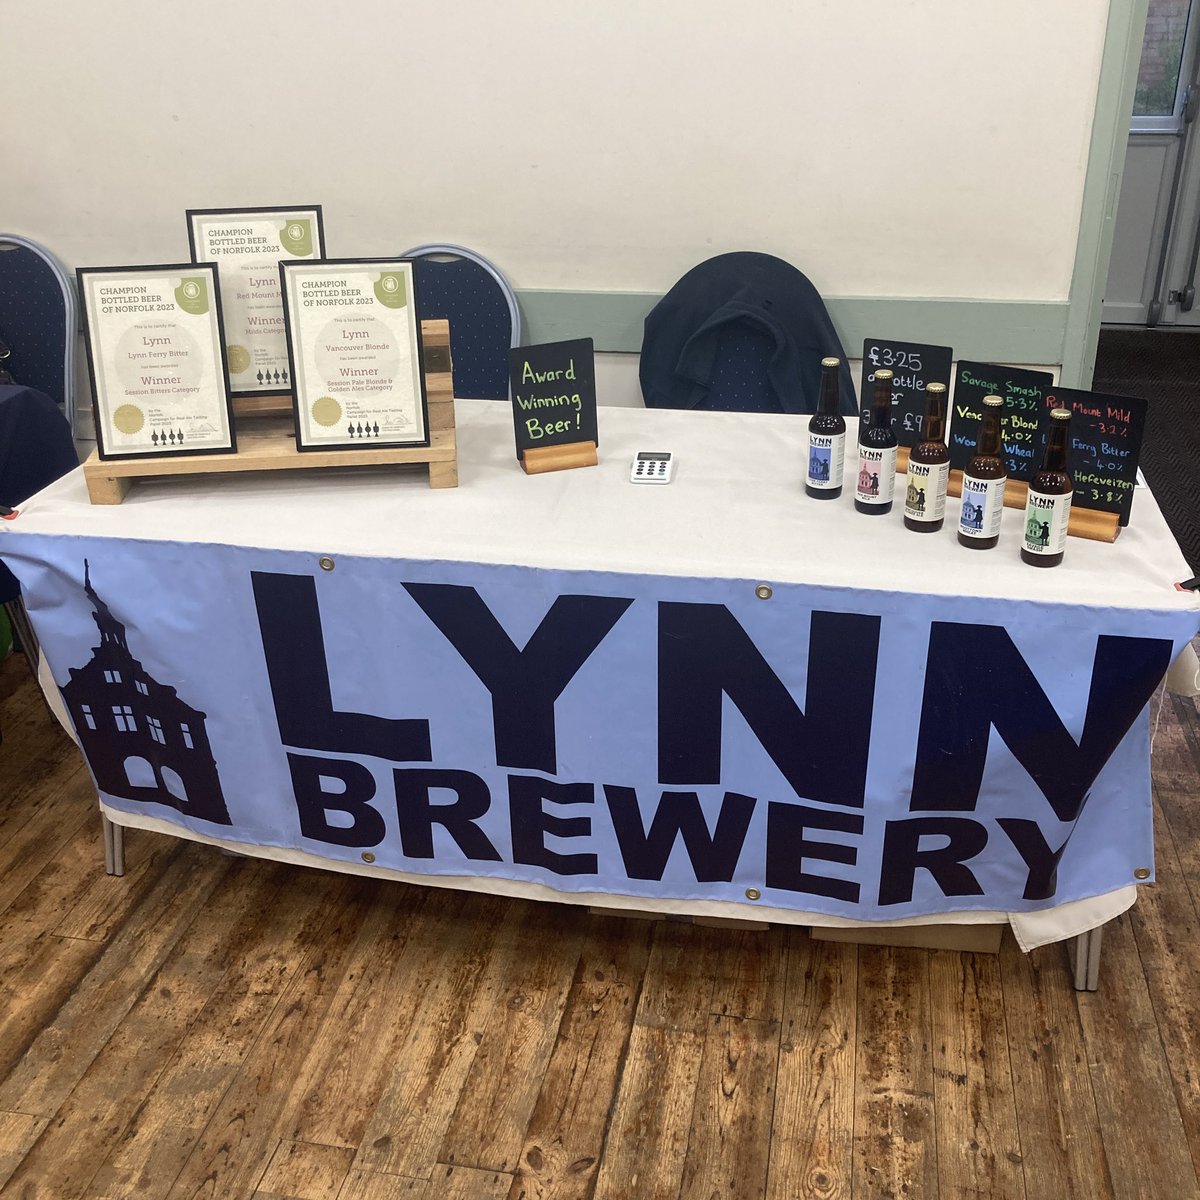 All set up at North Wootton Village Hall, ready for the market. We’re inside the hall today, out of the rain! Come and find us and try some of our award winning beer! @northwoottonvh @DiscKingsLynn @LoveWestNorfolk